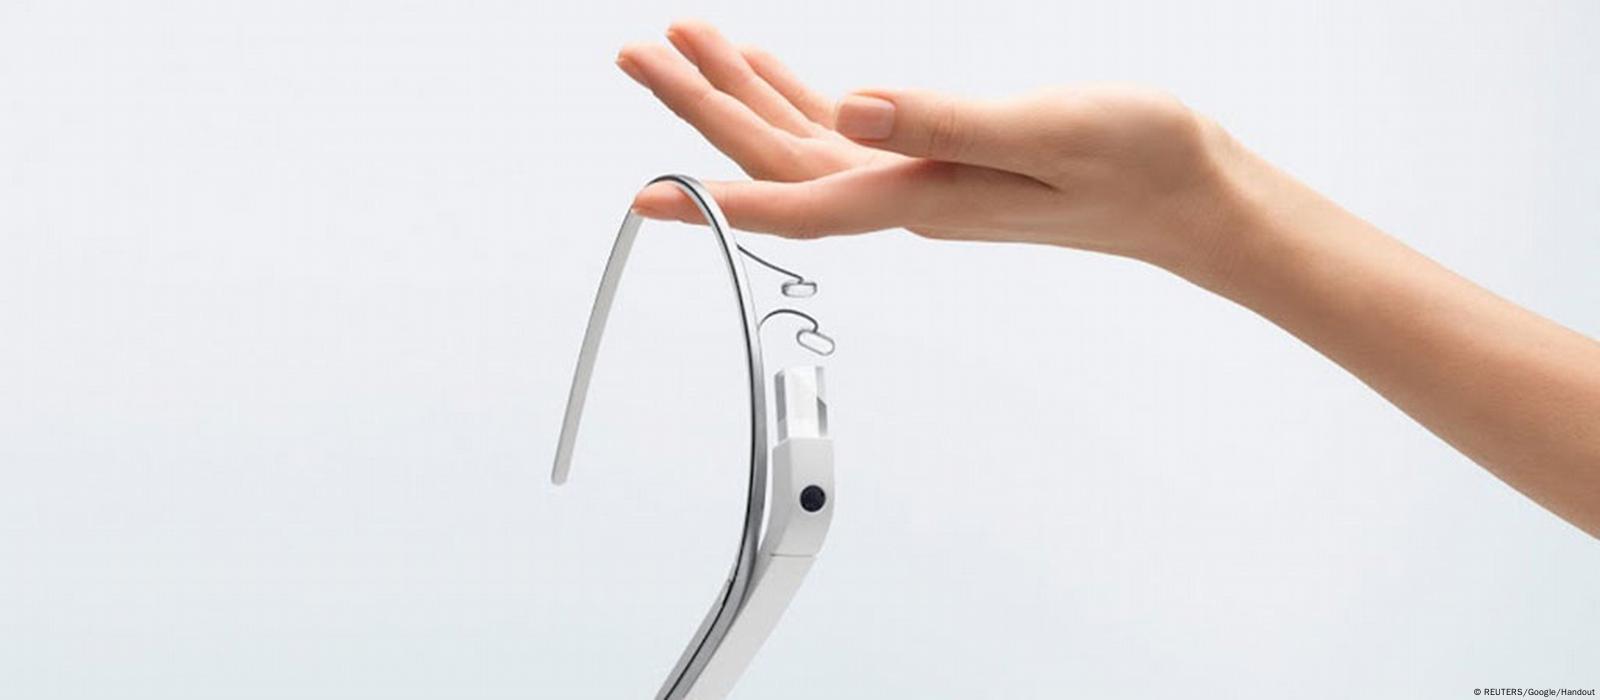 Hands On With Google Glass 2: What's New? - ReadWrite